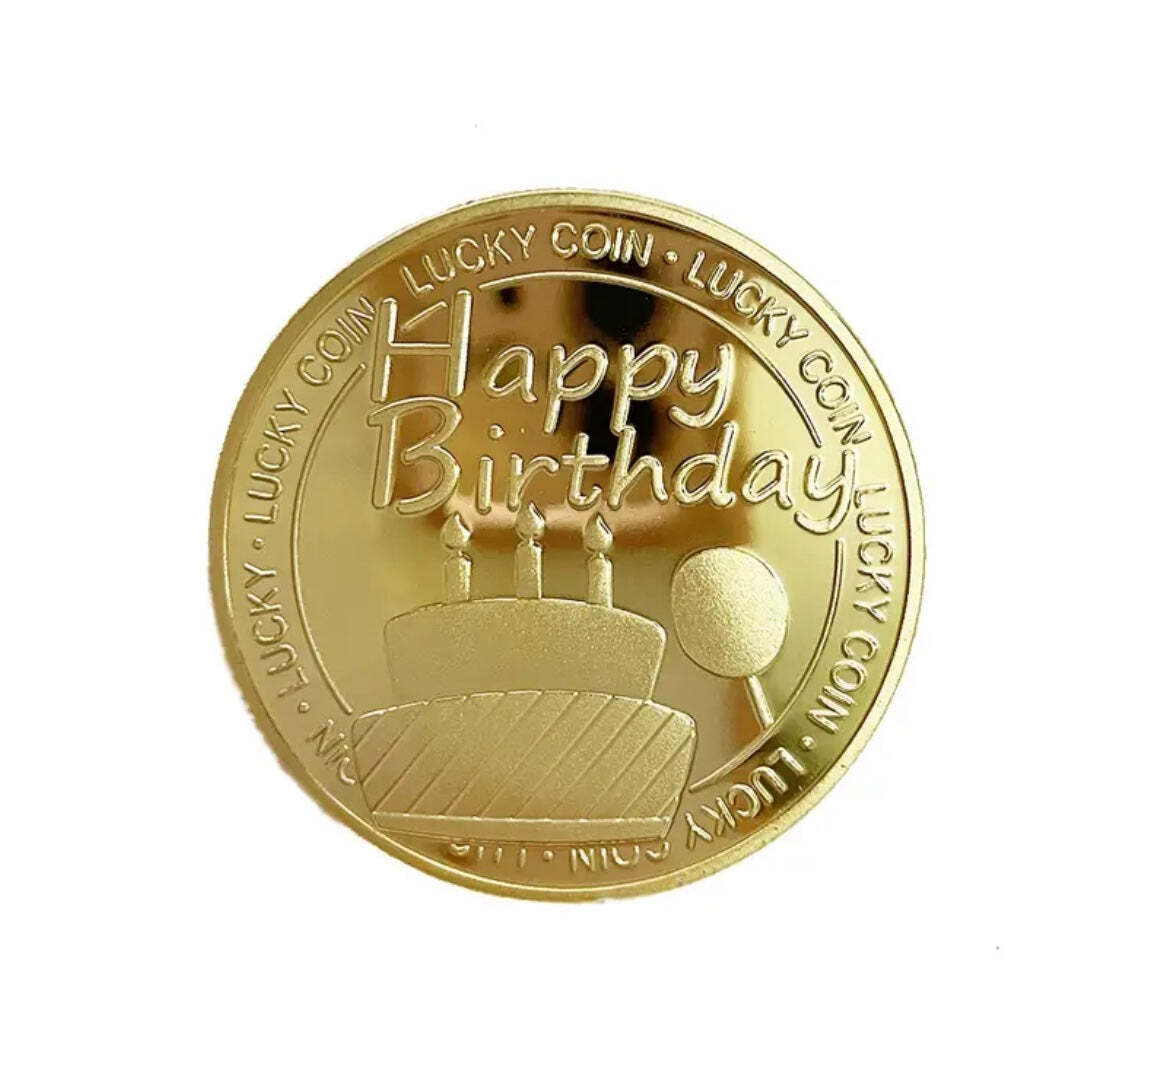 1 pc Happy Birthday Lucky Coin Wishful Gift